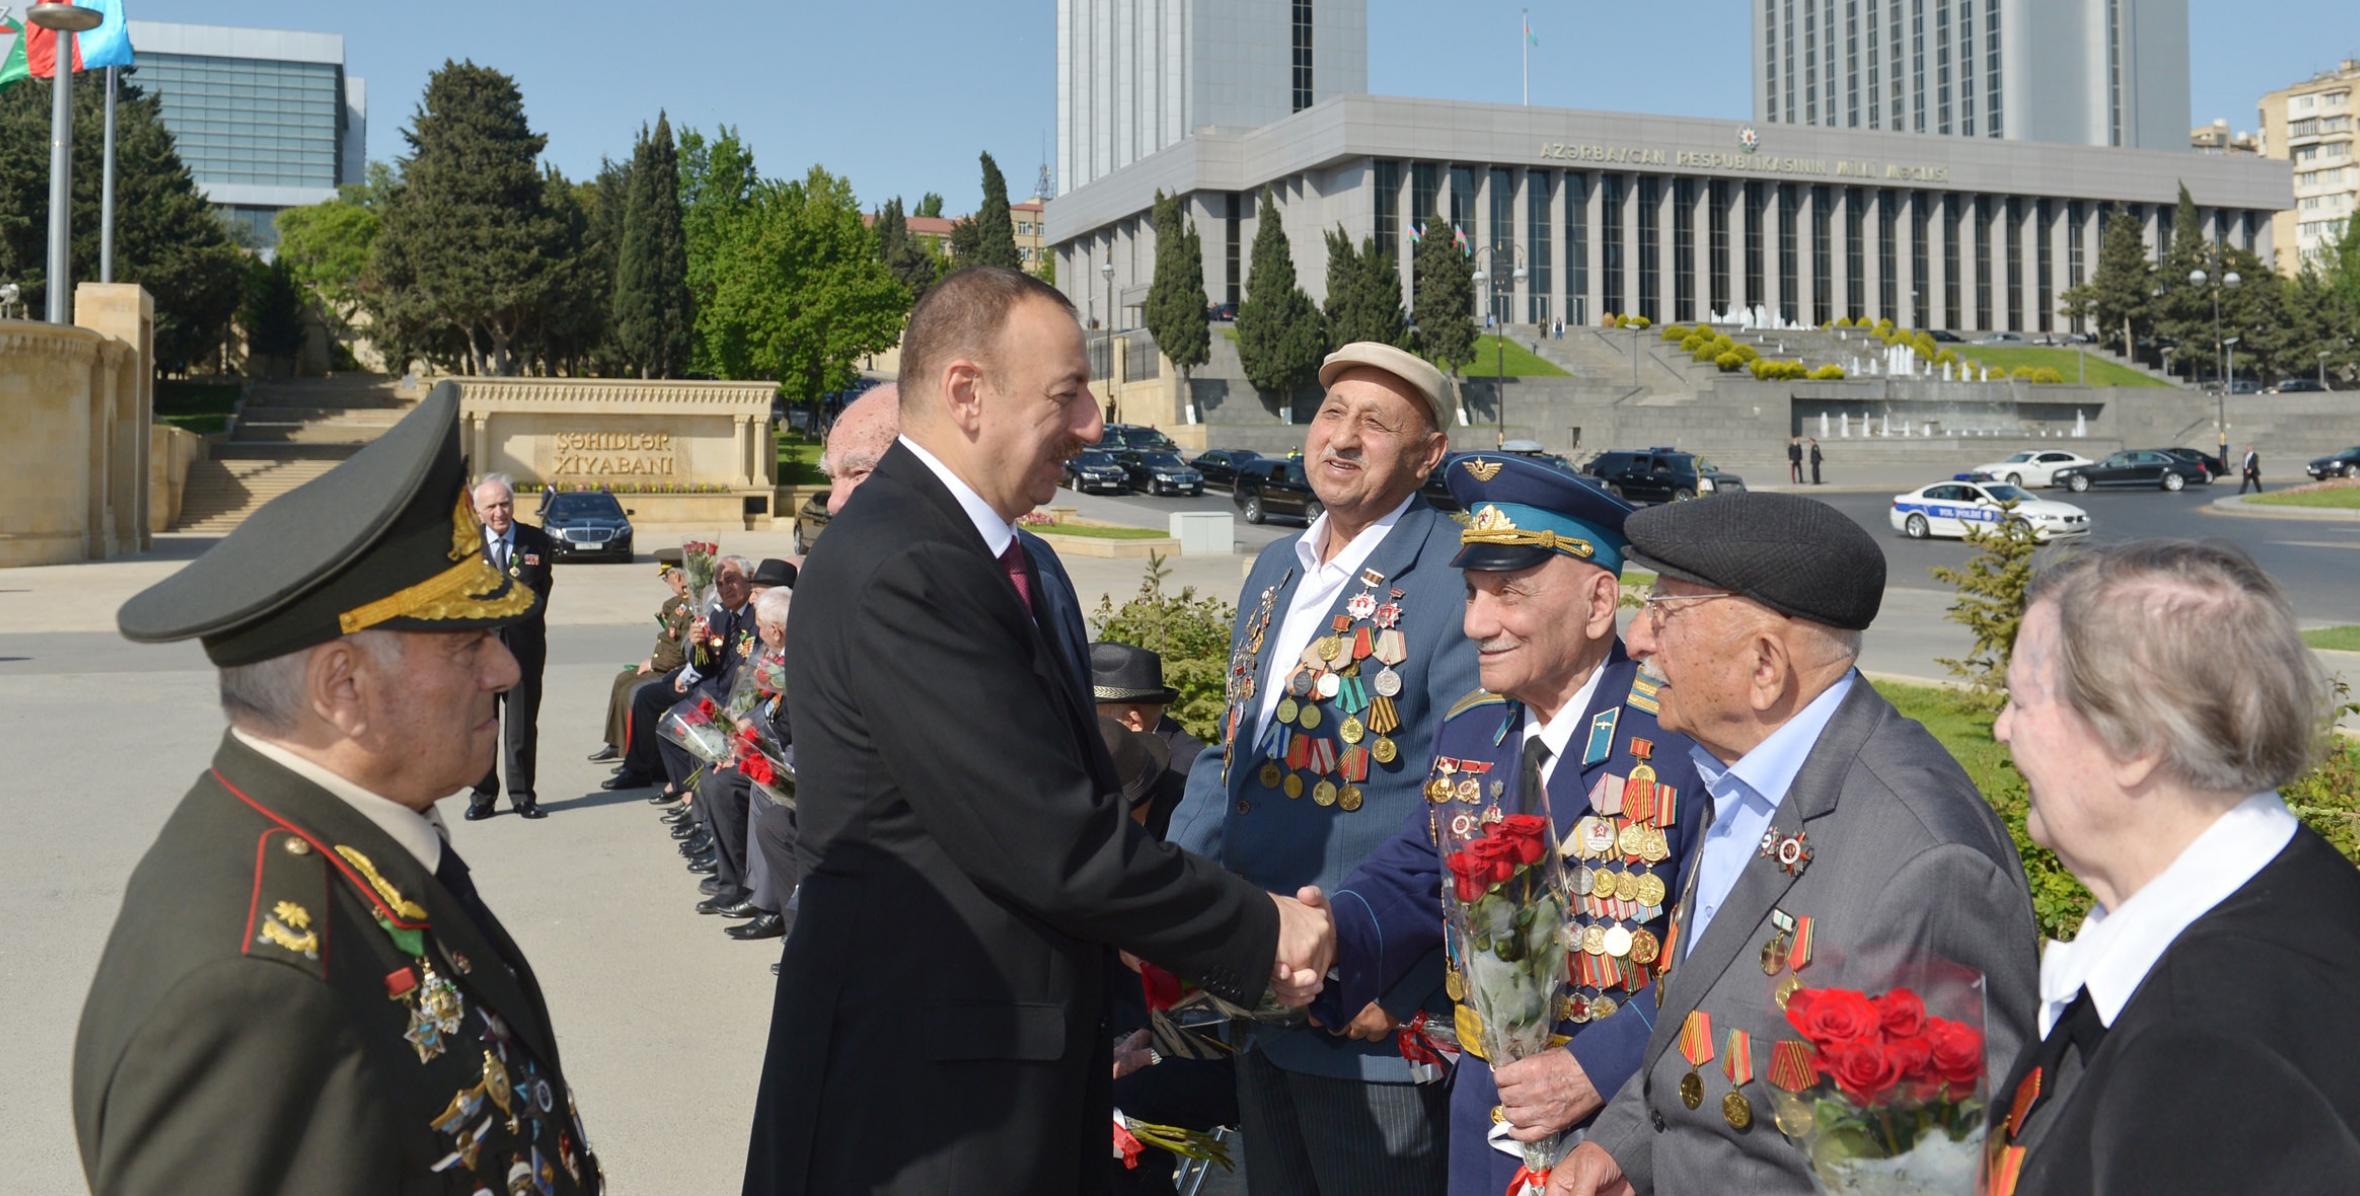 Ilham Aliyev attended a ceremony in Baku marking 9 May, Victory Day